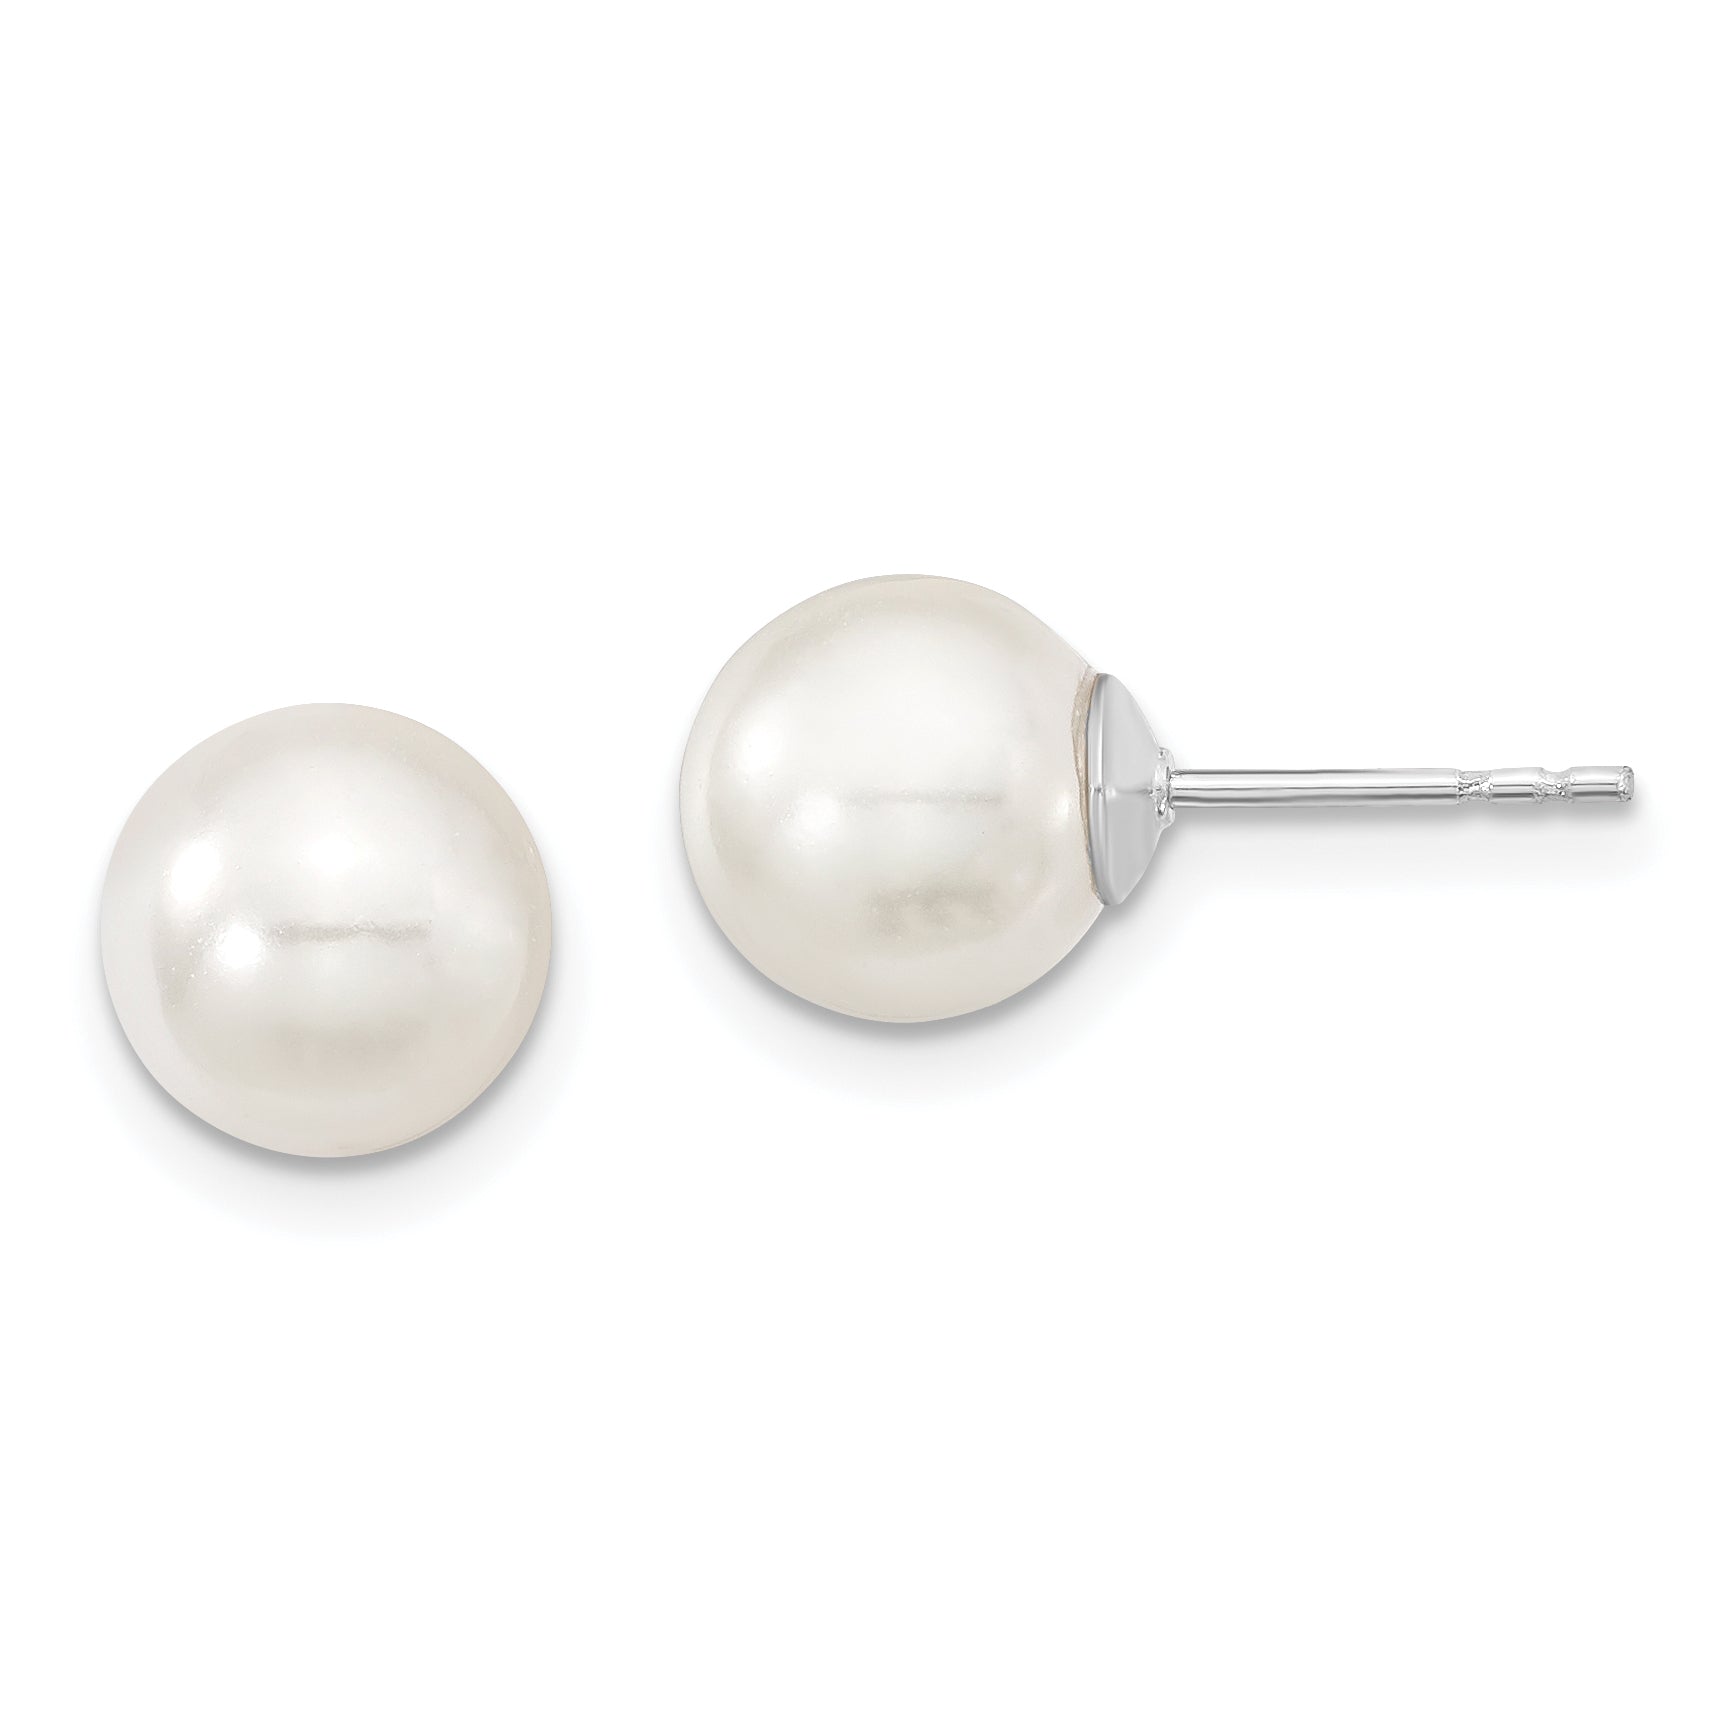 Majestic Sterling Silver Rhodium-plated 8-9mm White Imitation Shell Pearl Stud Earrings